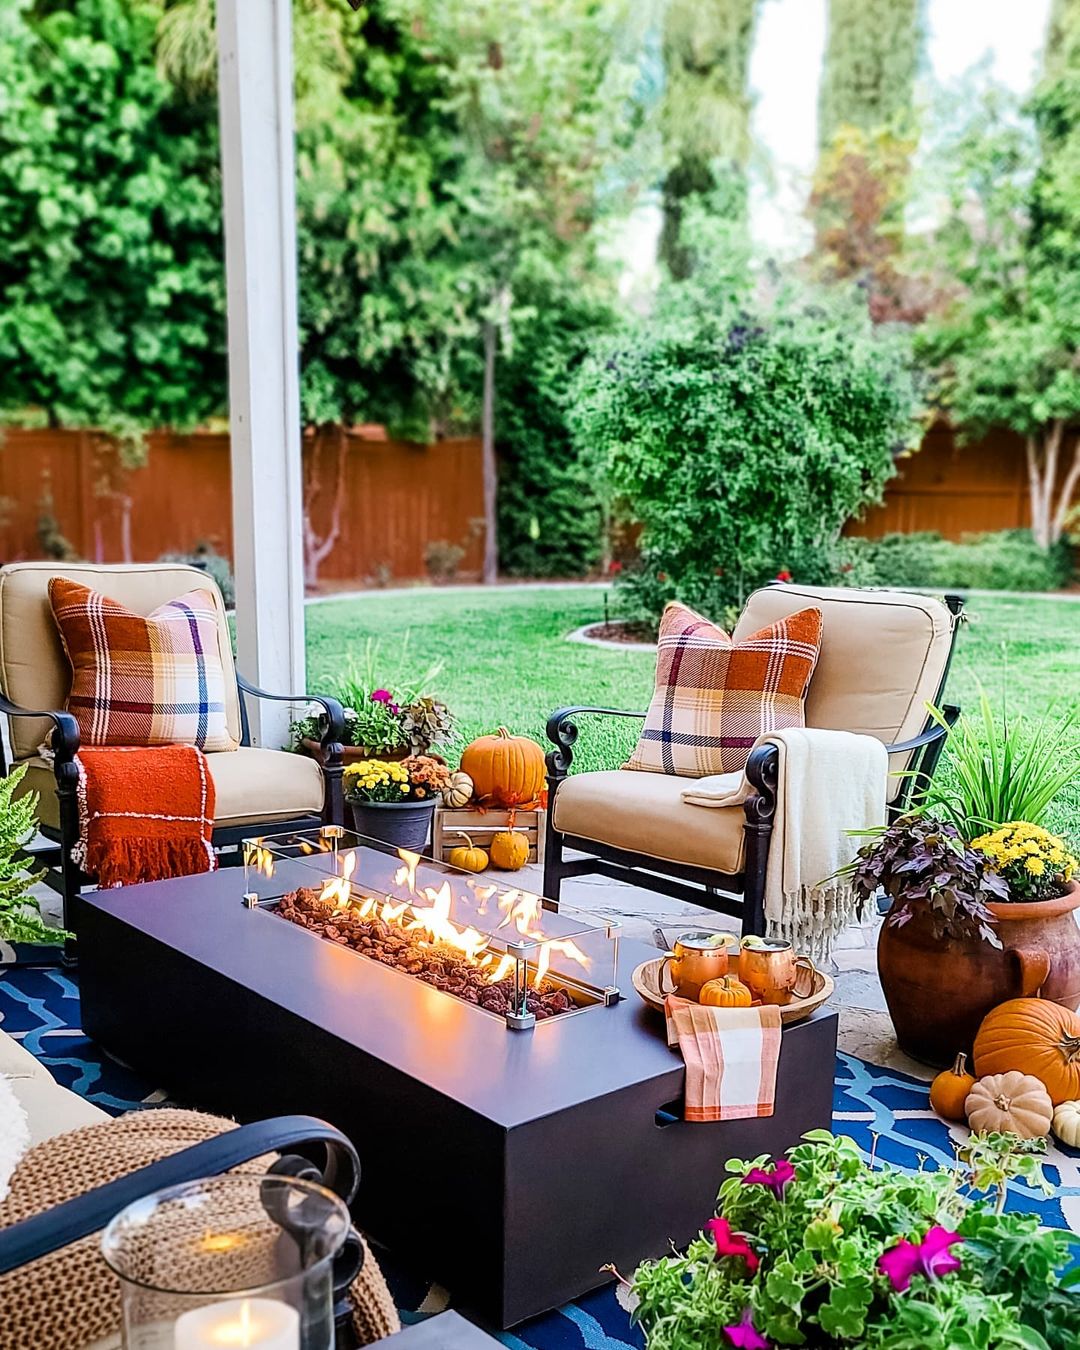 Backyard area with modern fire pit and seating. Photo by Instagram user @simple.joy.at.home